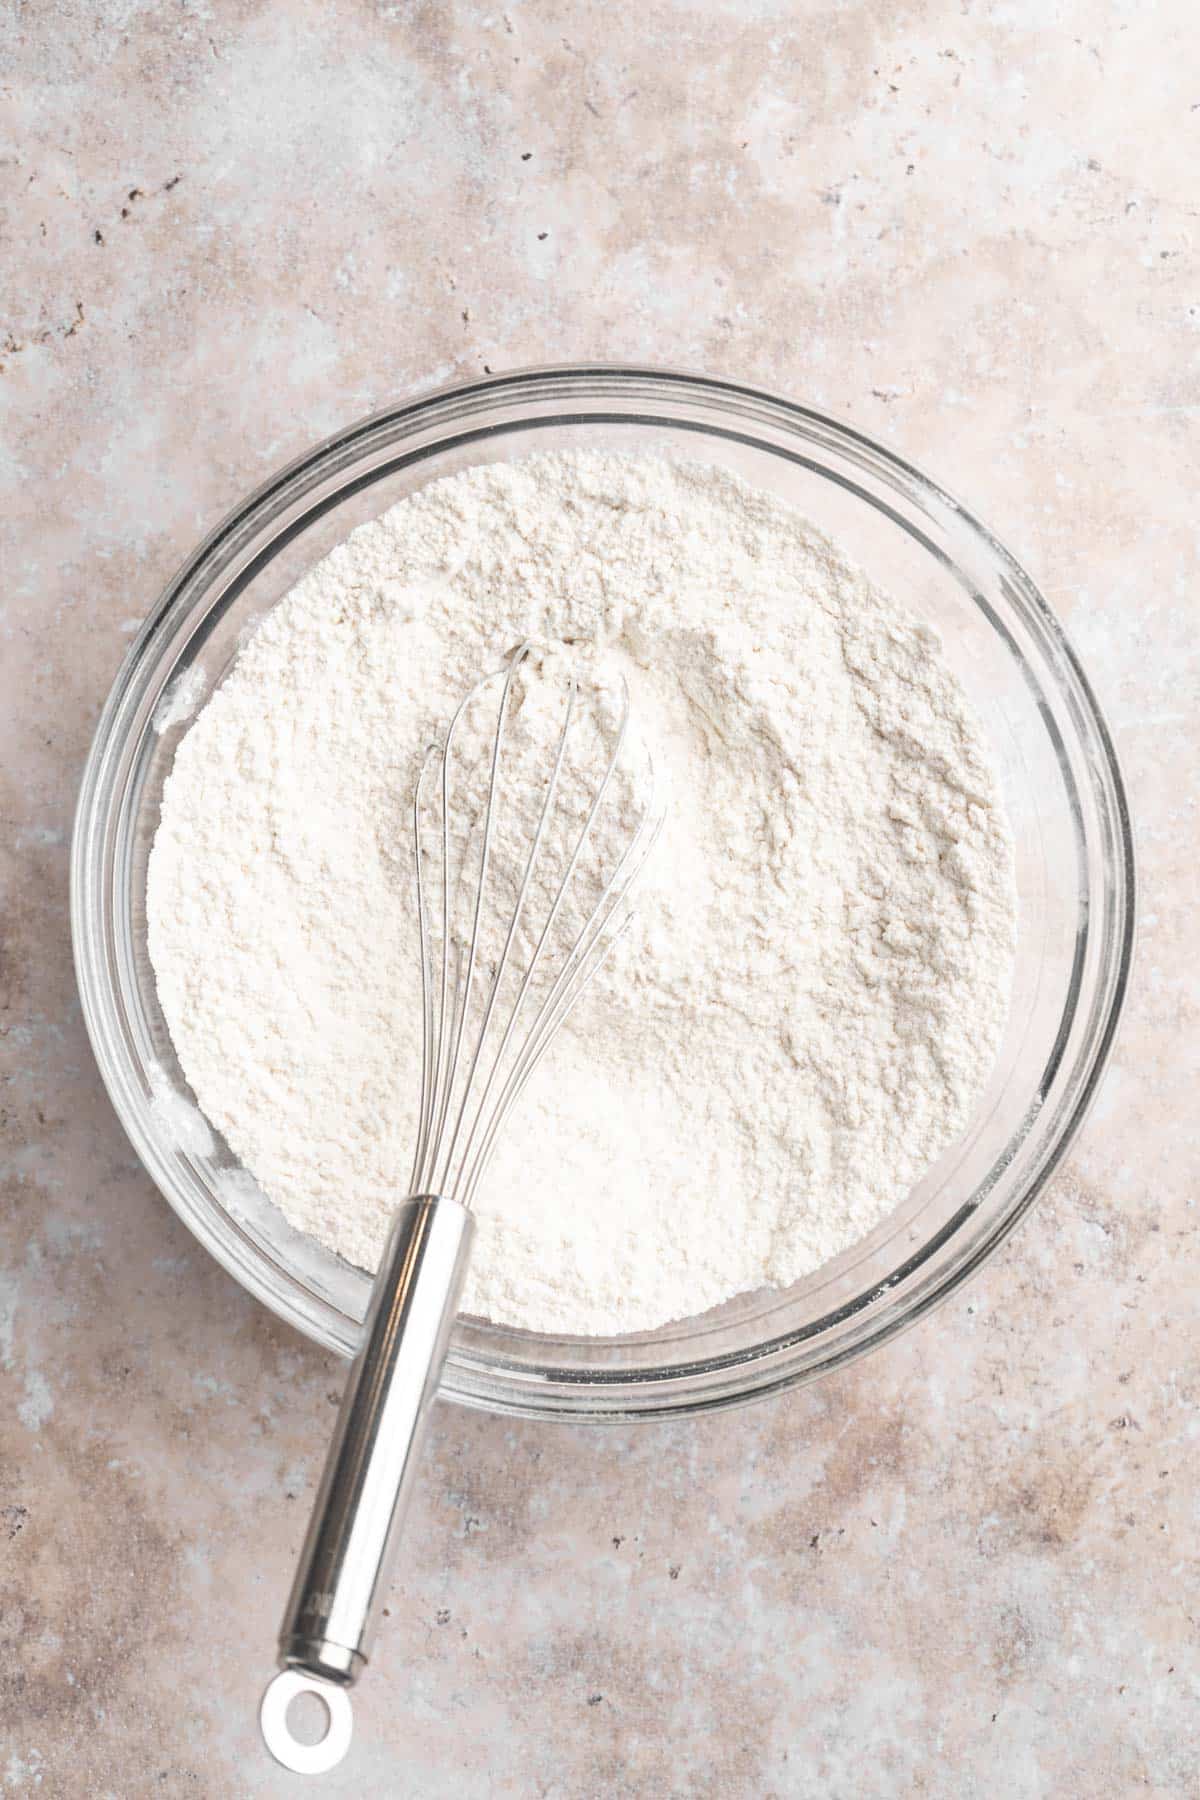 Whisking flour with baking powder in a large bowl.